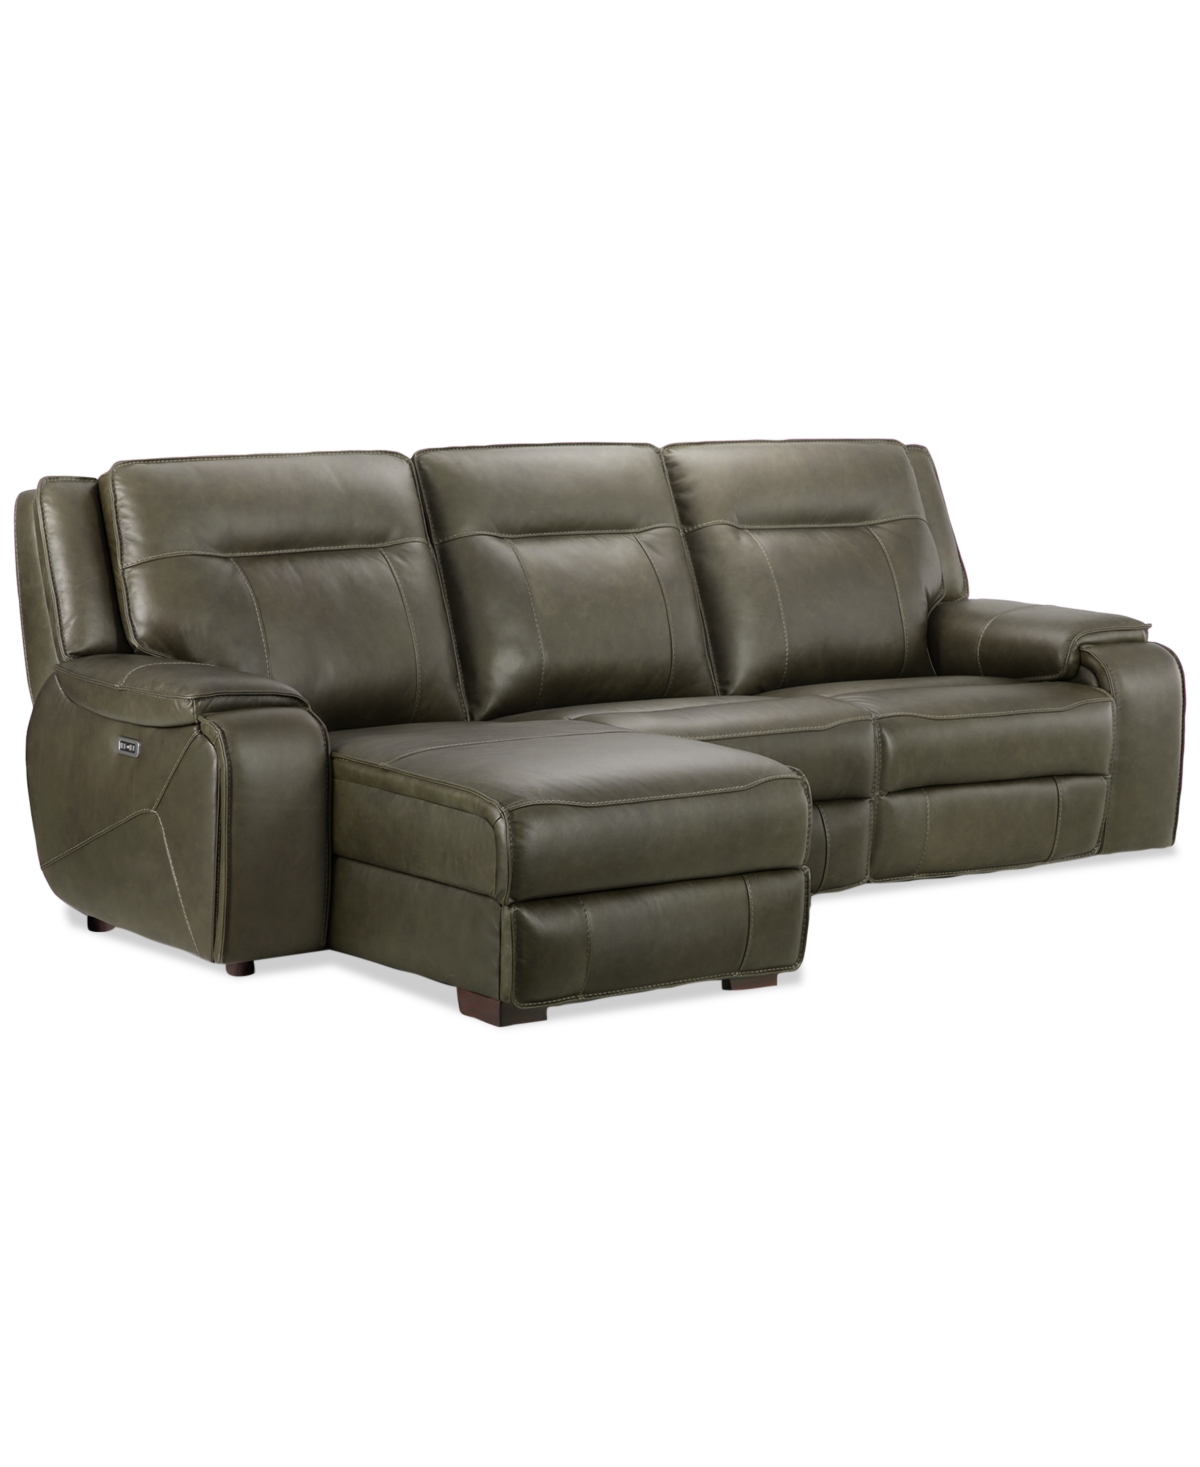 Macy's Hansley 3-pc Zero Gravity Leather Sofa With 2 Power Recliners And Chaise, Created For  In Grey